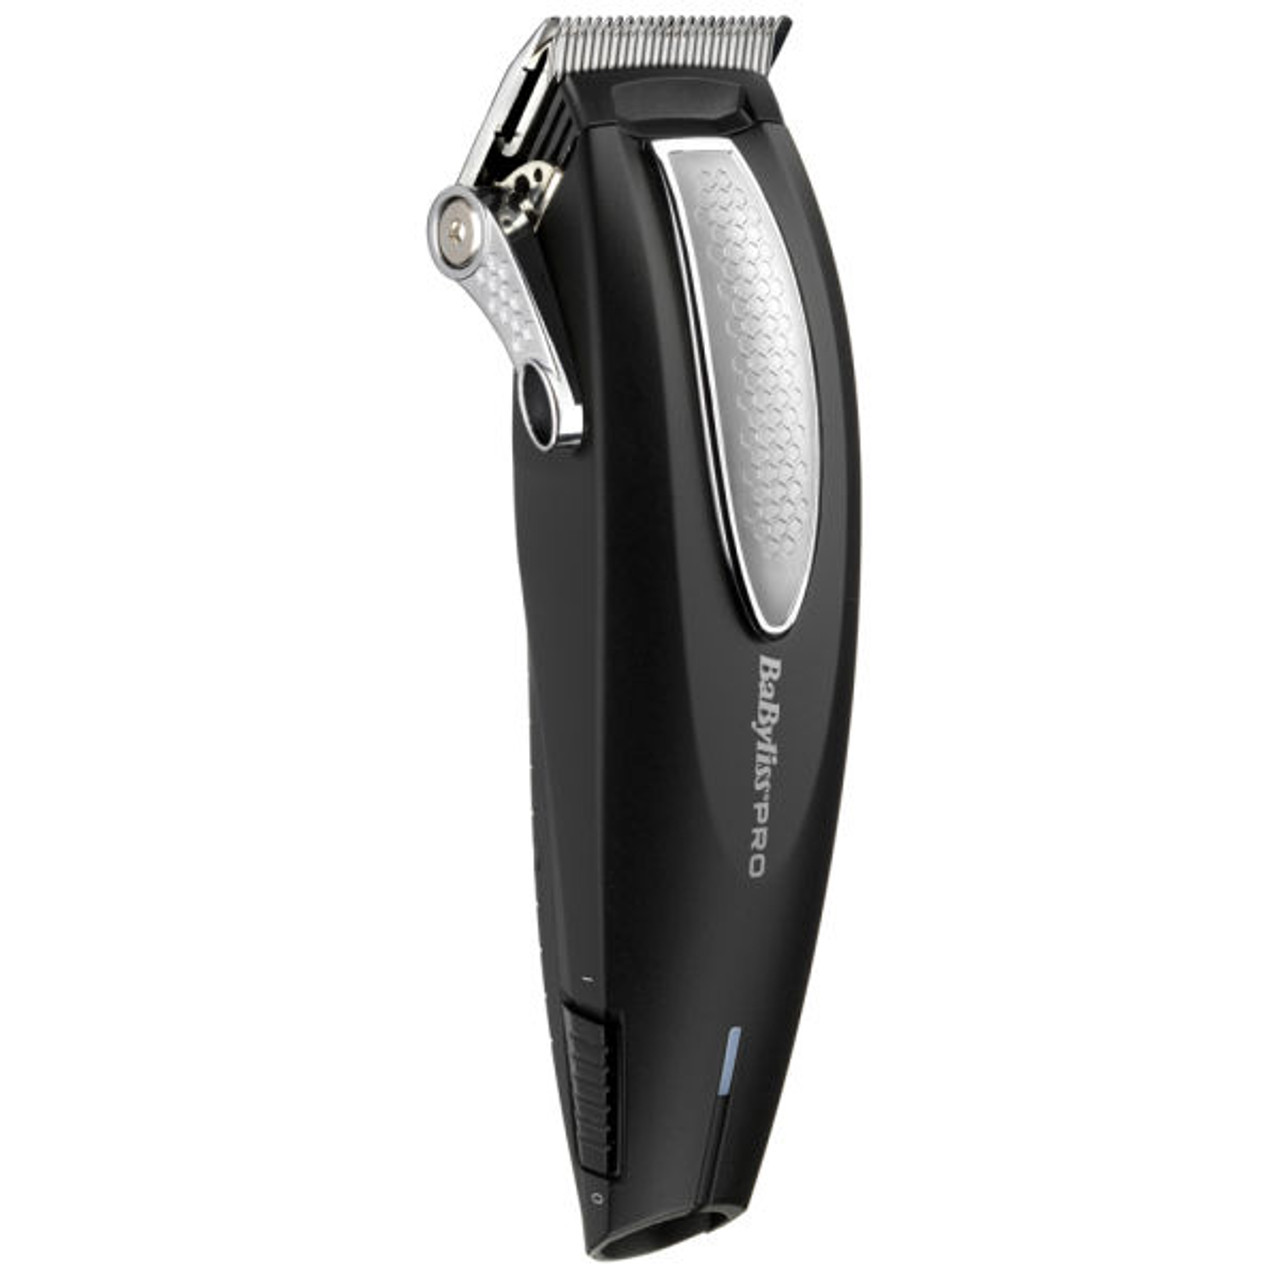 babyliss blue hair clippers